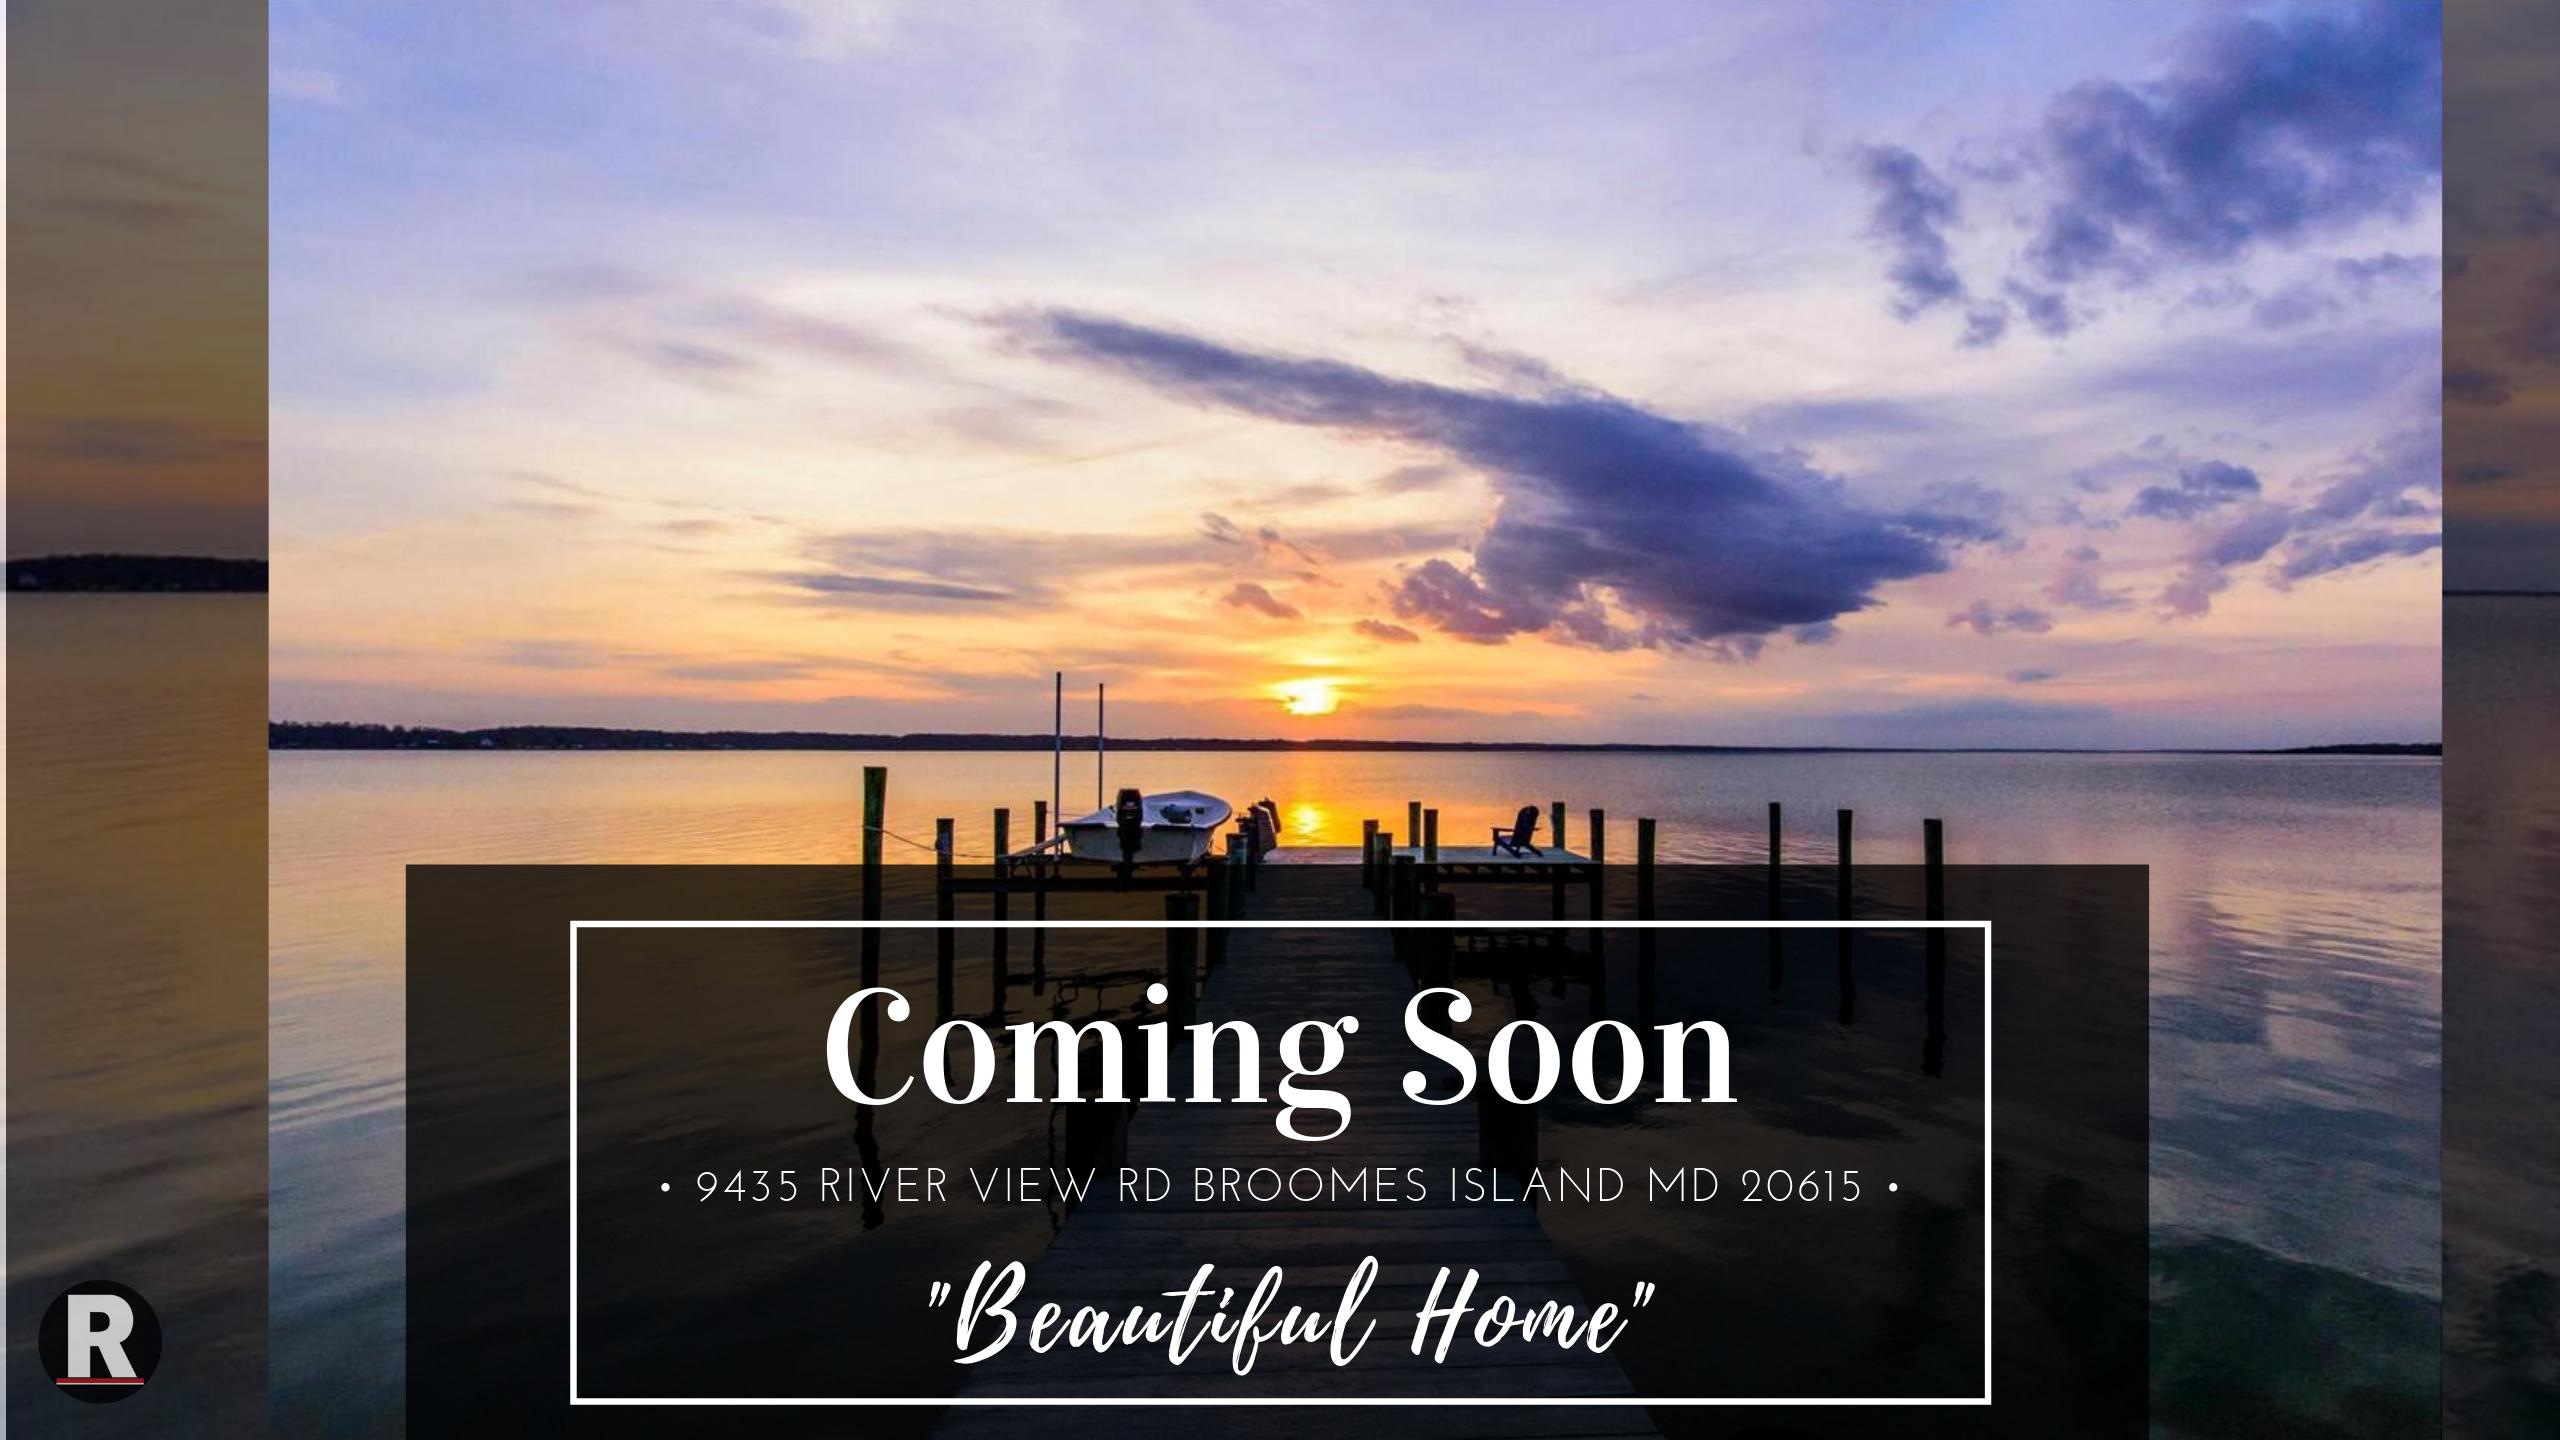 Coming Soon! 9435 River View Rd Broomes Island MD 20615